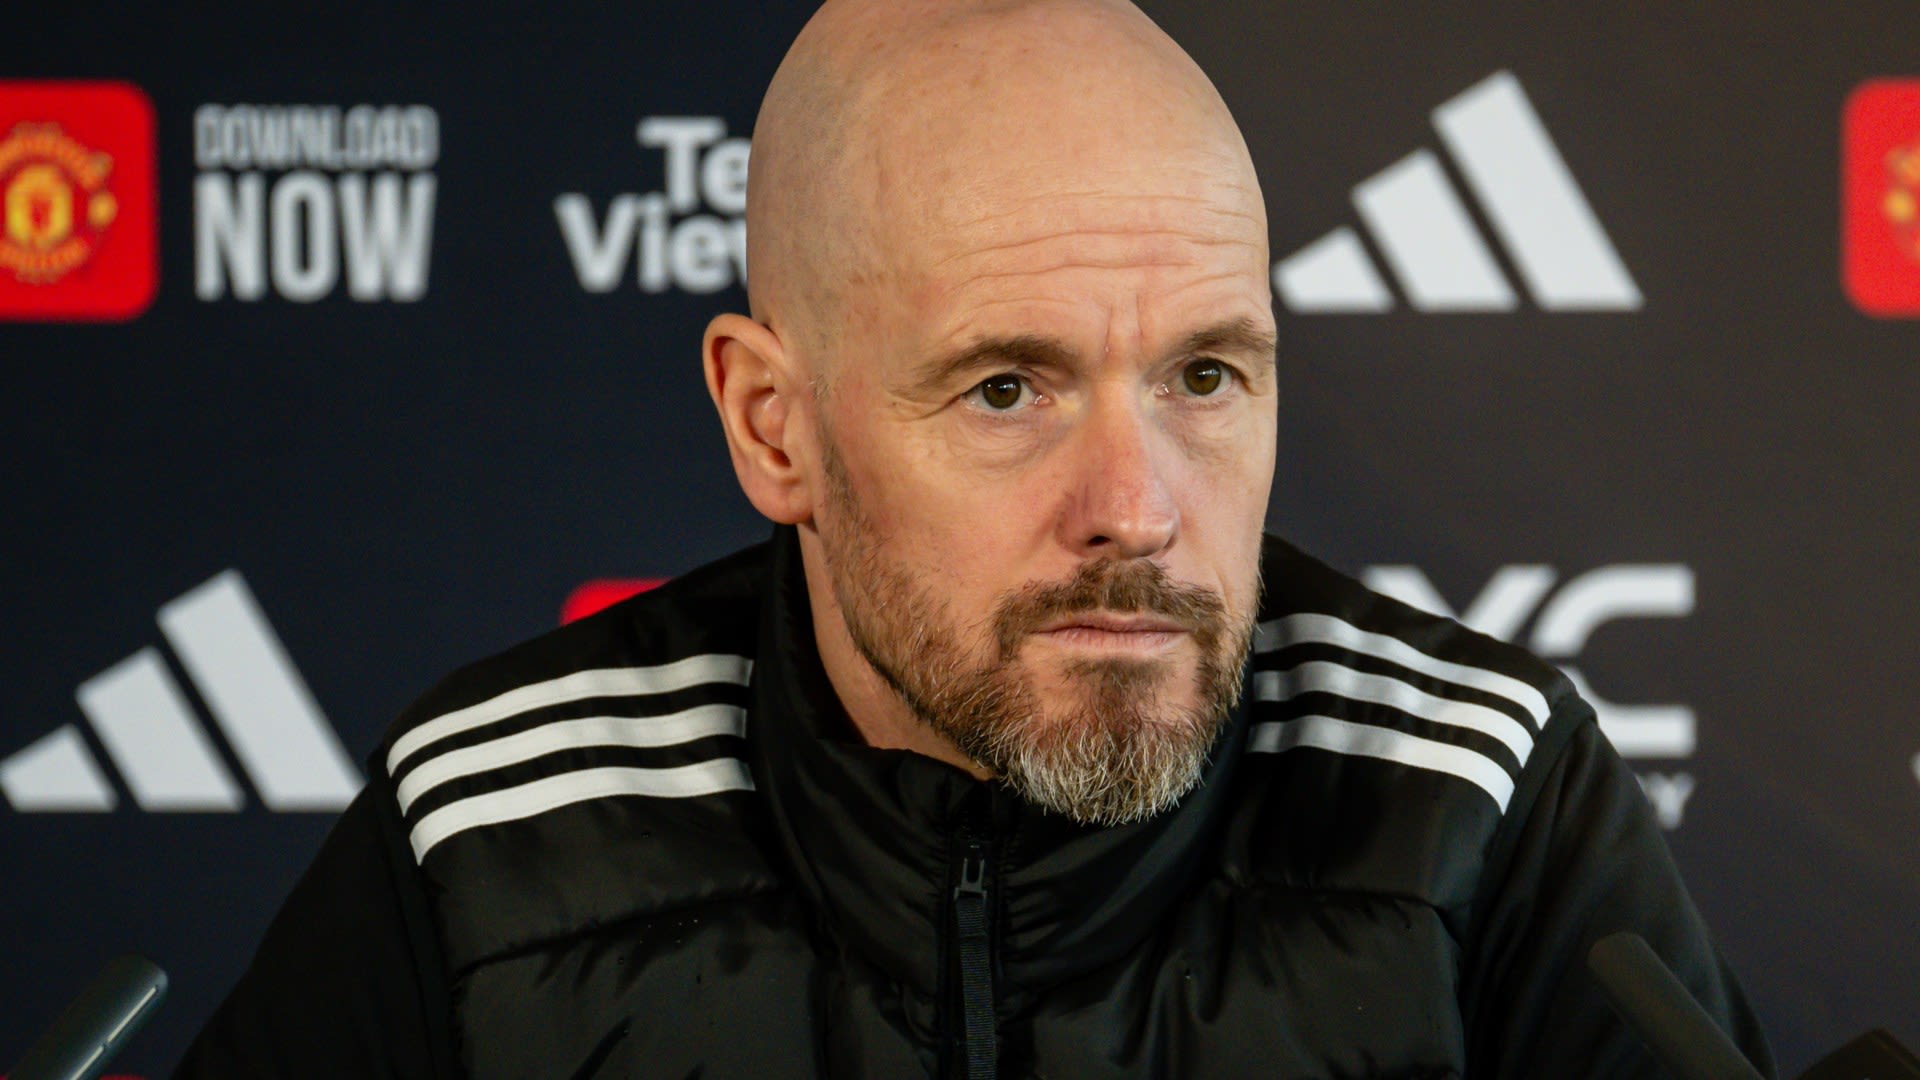 Ten Hag says only one Man Utd manager has 'got the players he wanted'